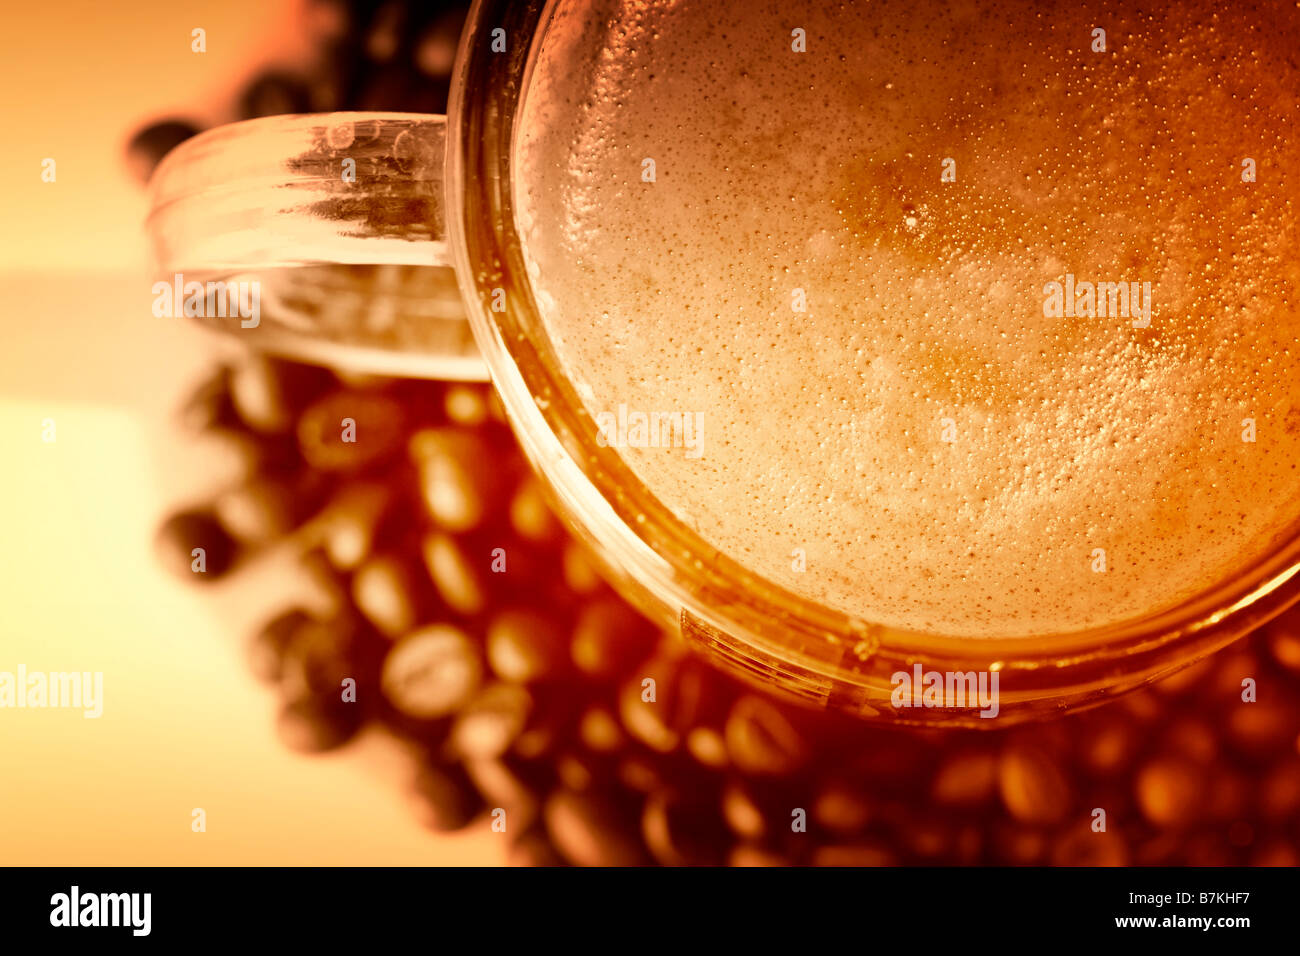 Cup with coffee, costing on coffee grain Stock Photo